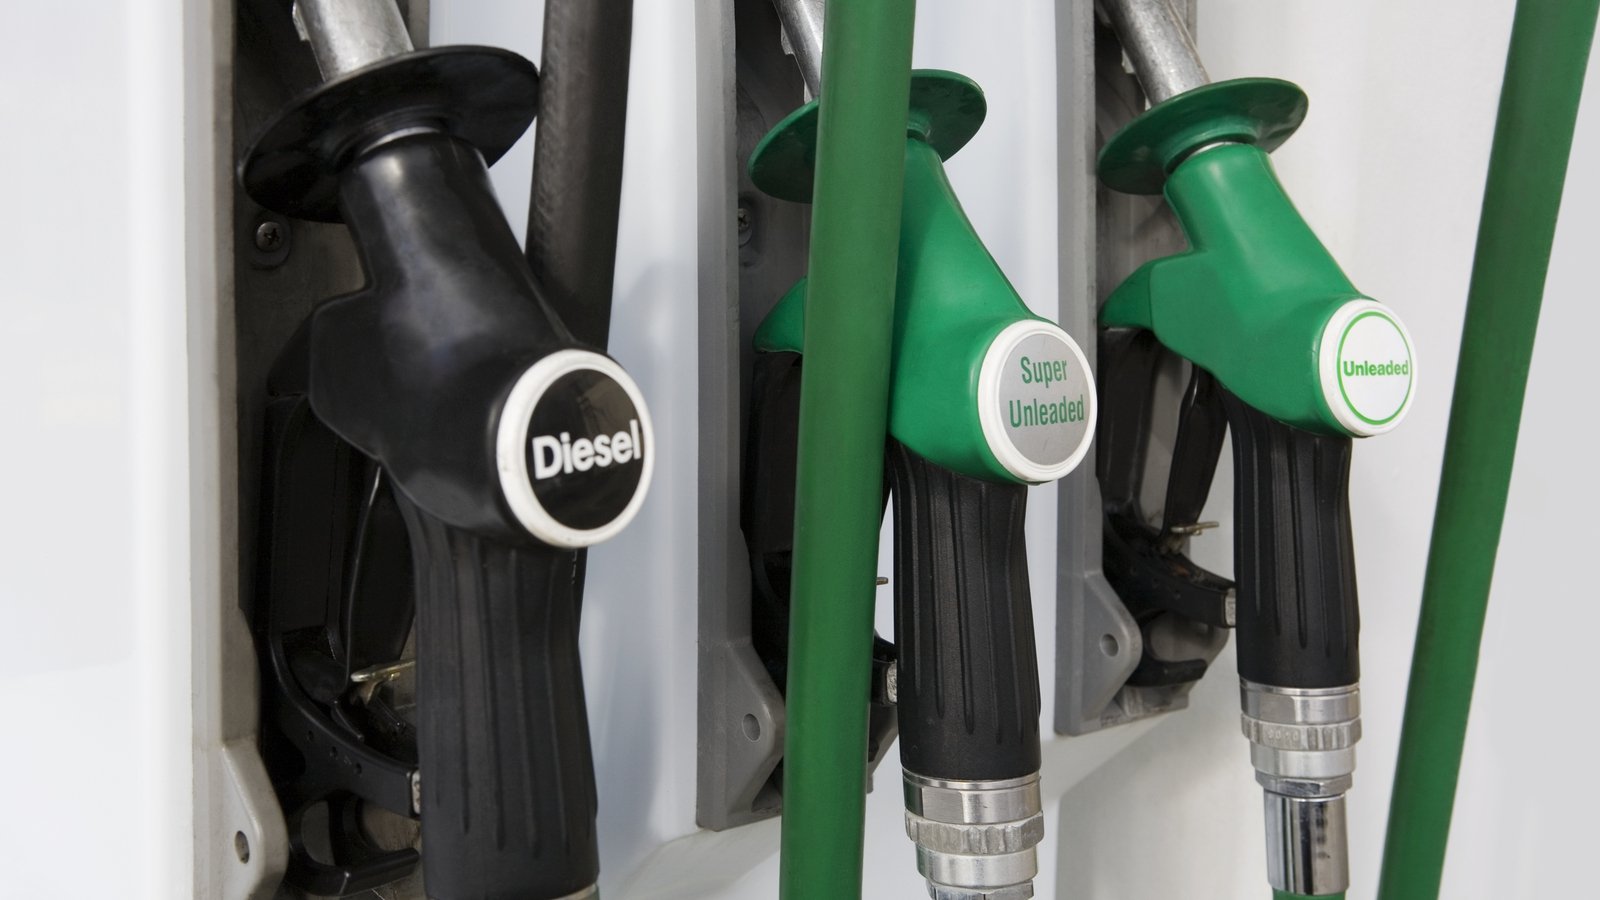 Fuel prices see slight fluctuation in May